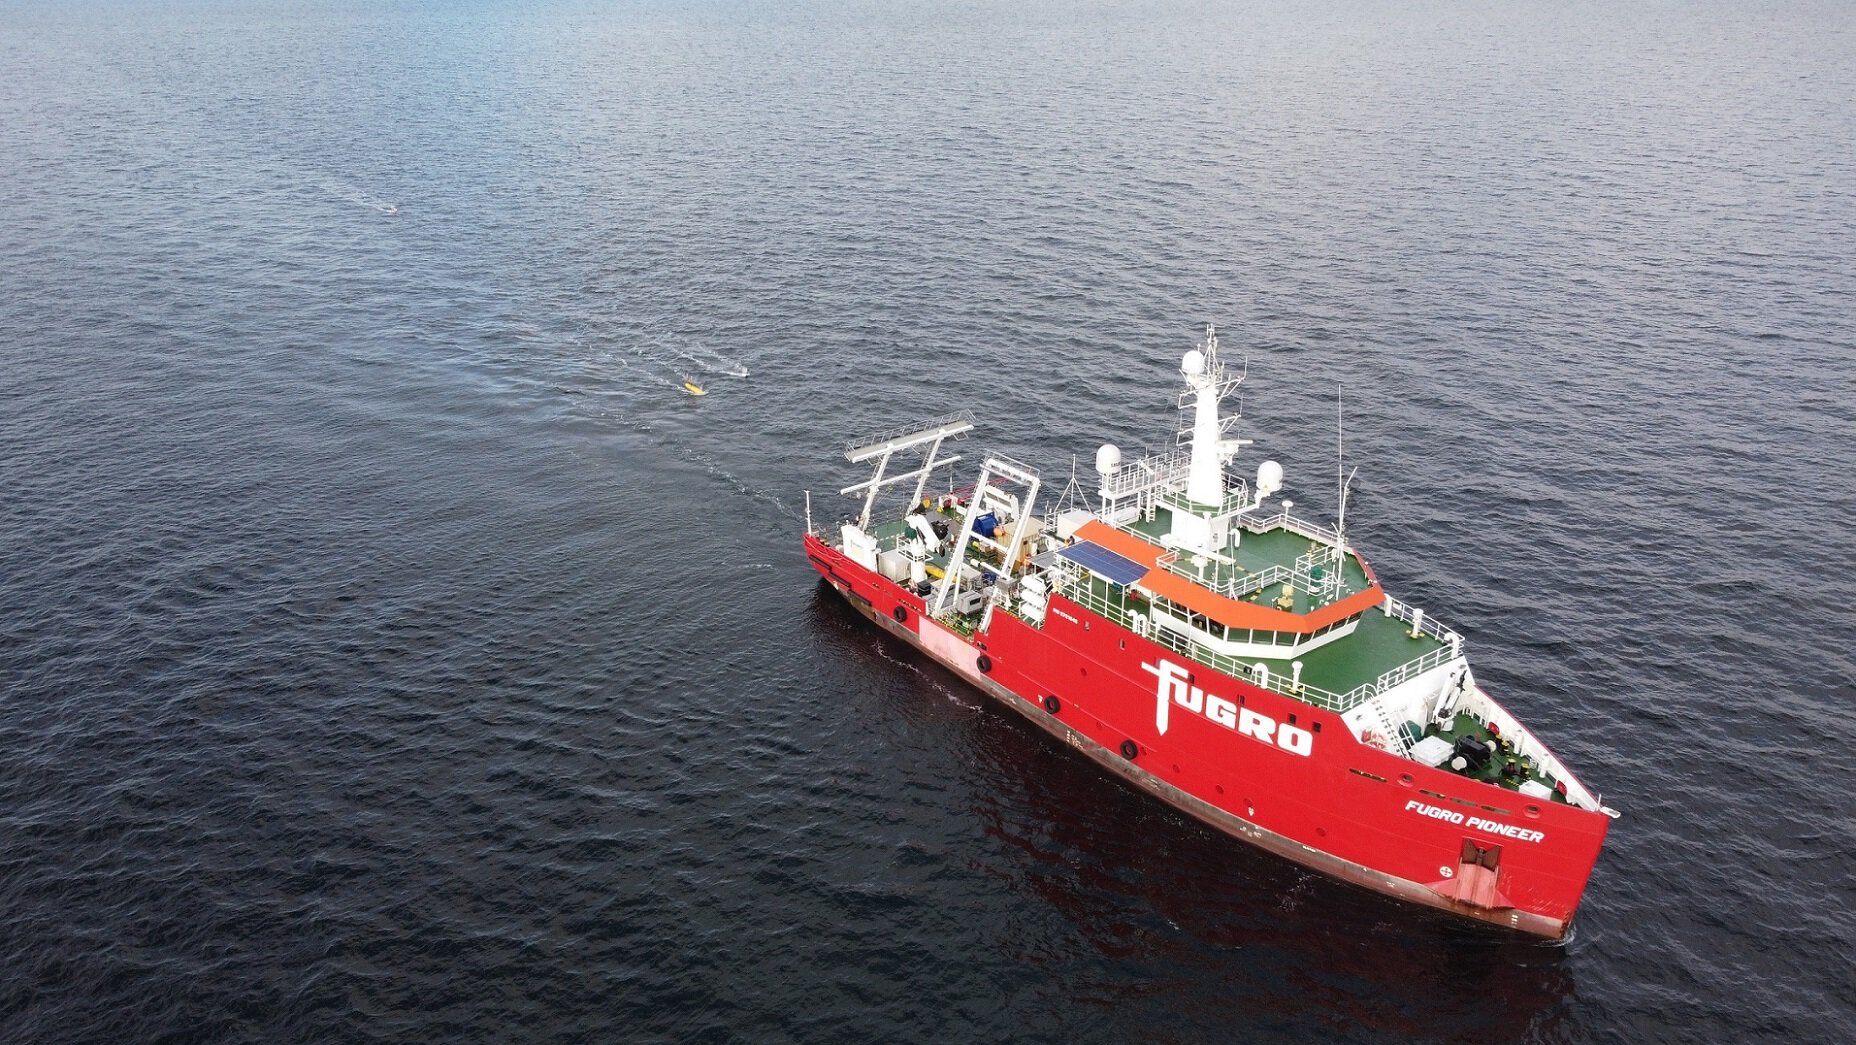 Type=N, Mode=P, DE=None
Aerial view of Fugro Pioneer during 3D UHR seismic survey for Energinet's Hesselo offshore wind farm, Denmark